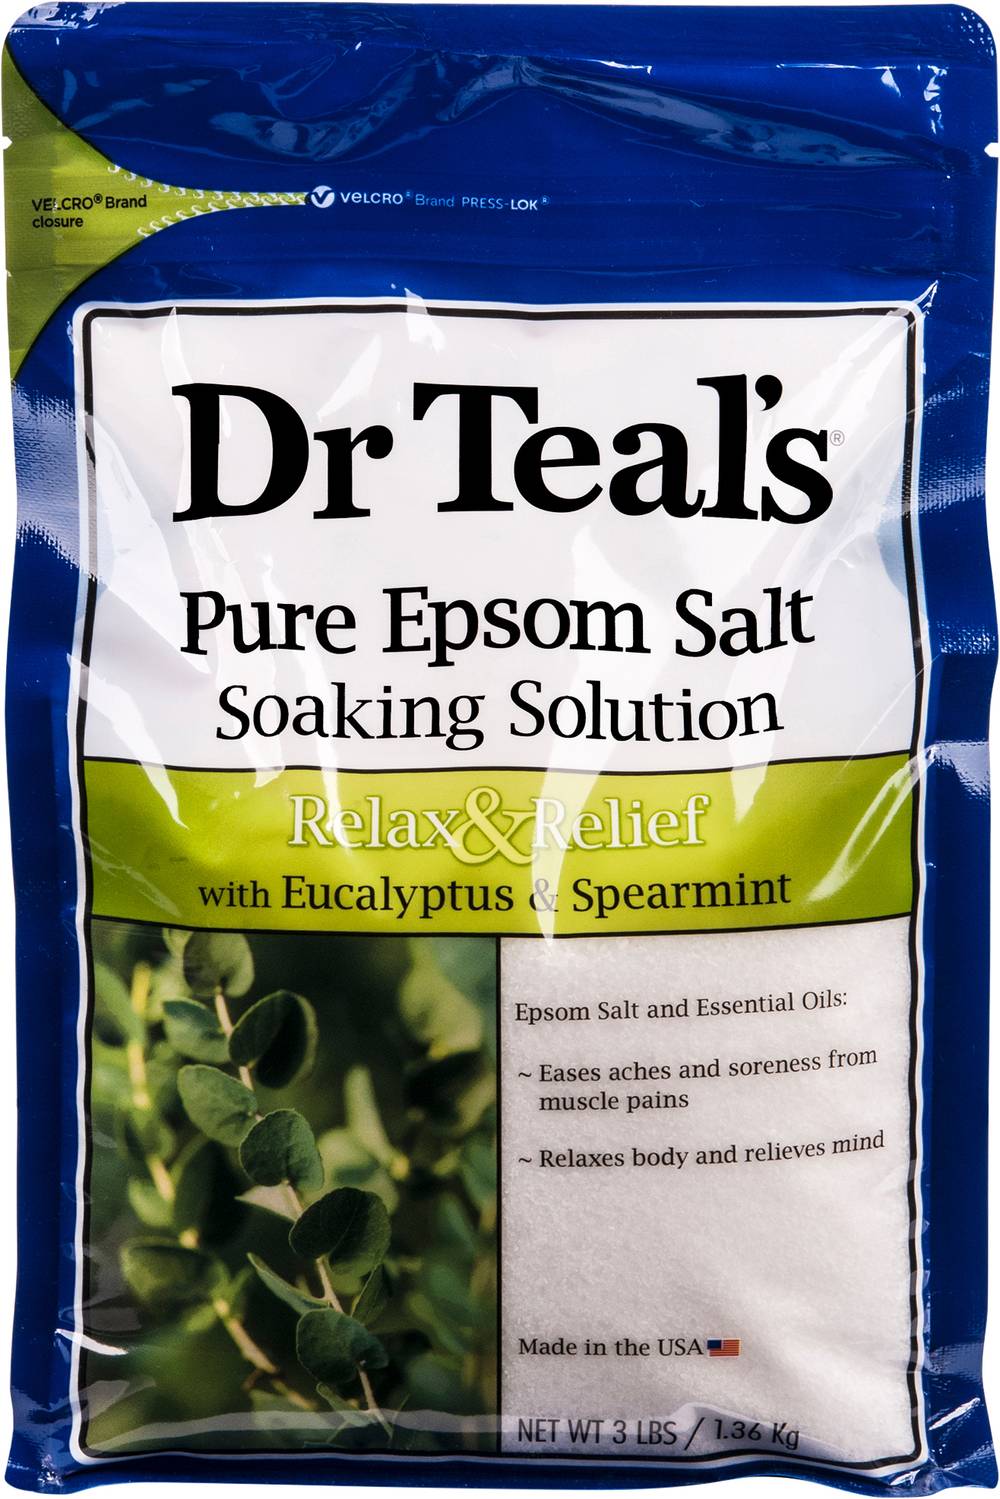 Dr. Teal's Relax & Relief Pure Epsom Salt Soaking Solution